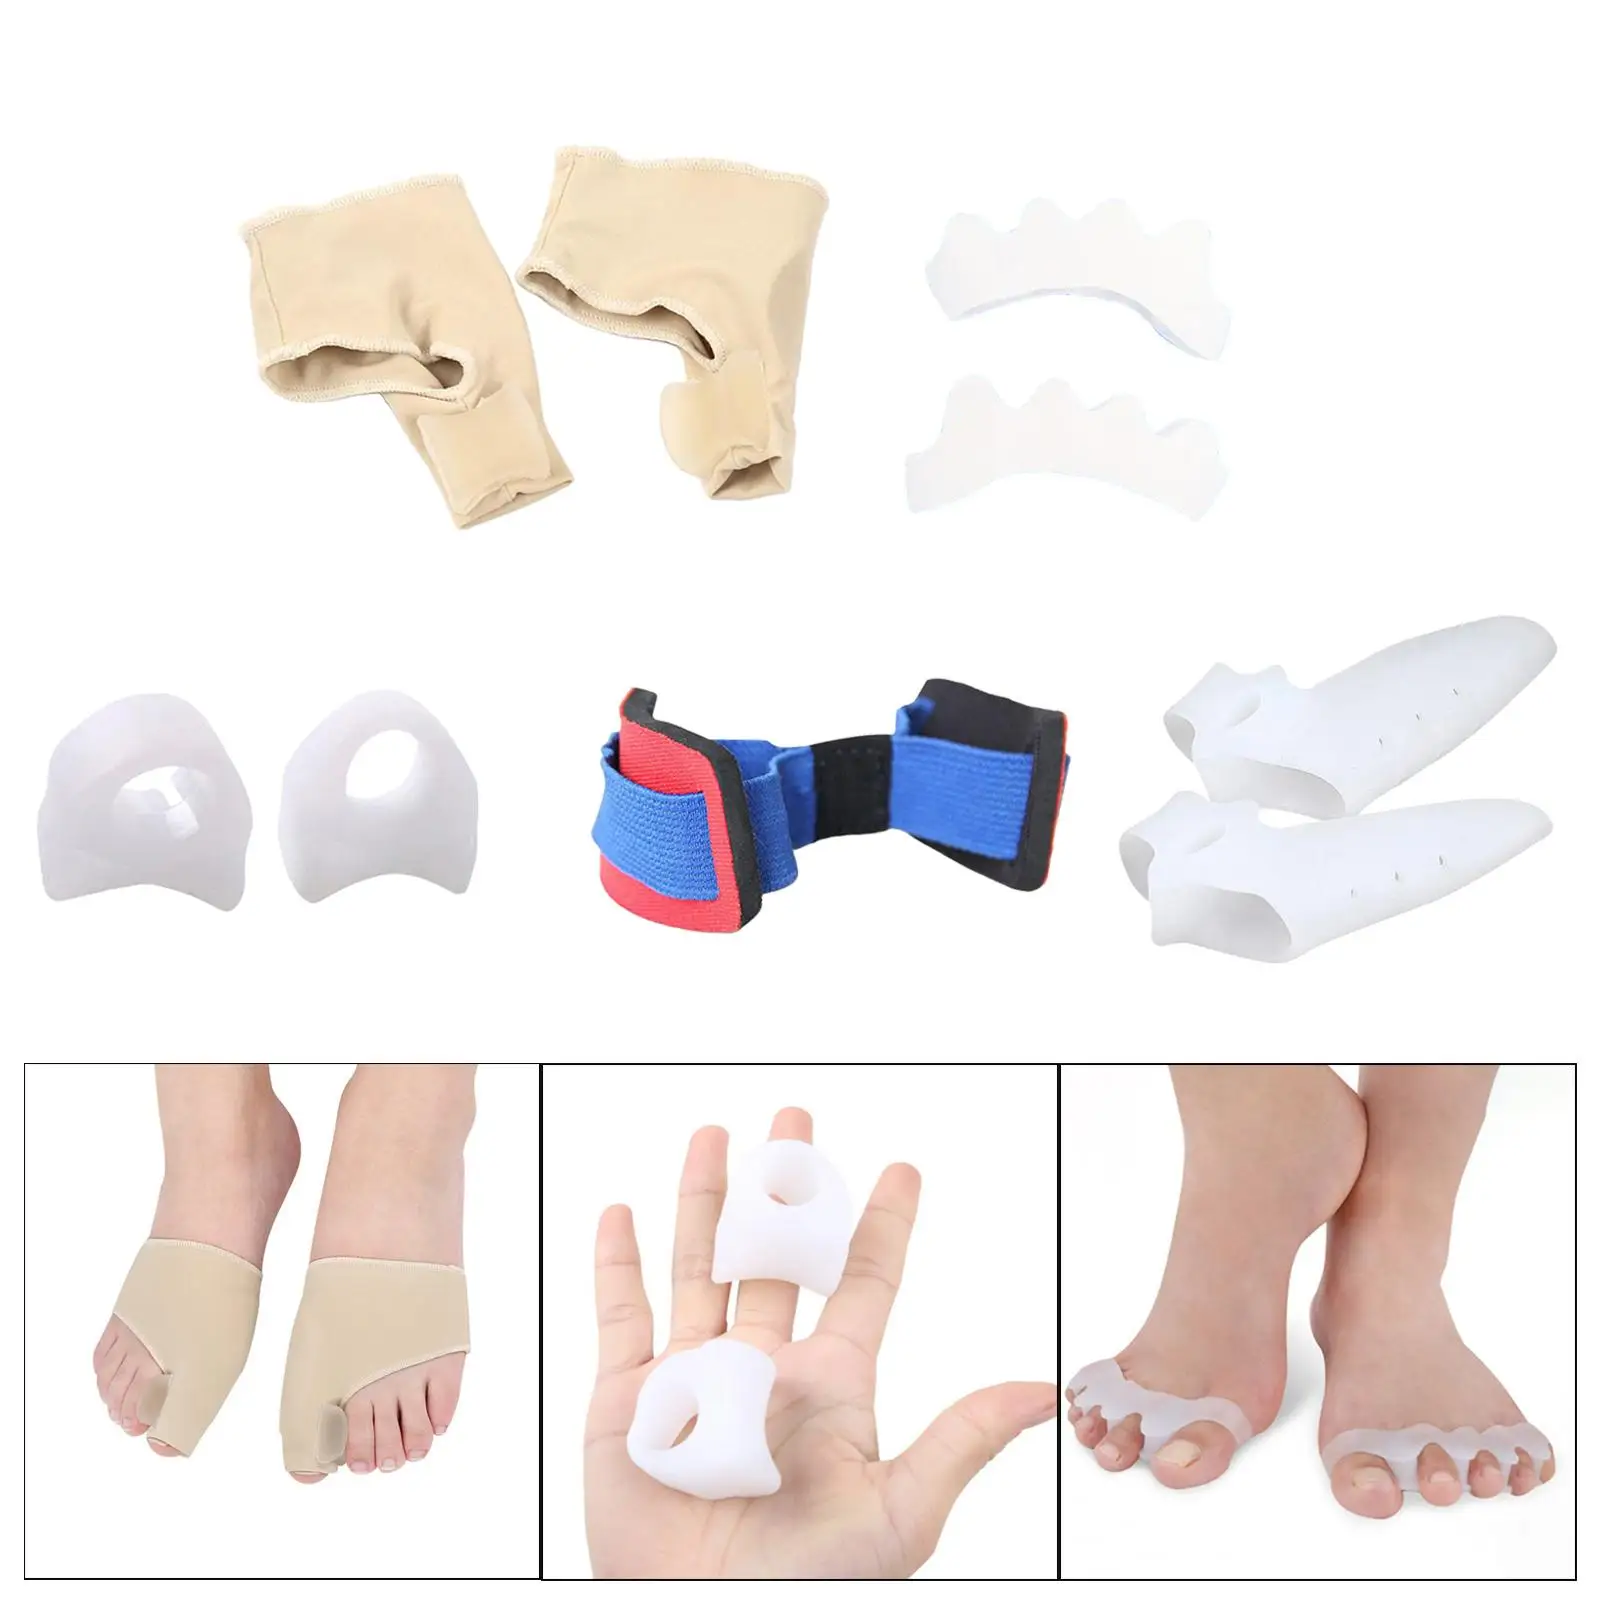 Set of 9 Bunion Corrector Bunion Relief Sleeves Kit, Toe Spacer , Just Slip Them On and Get Rolling Premium Stretchable Reusable